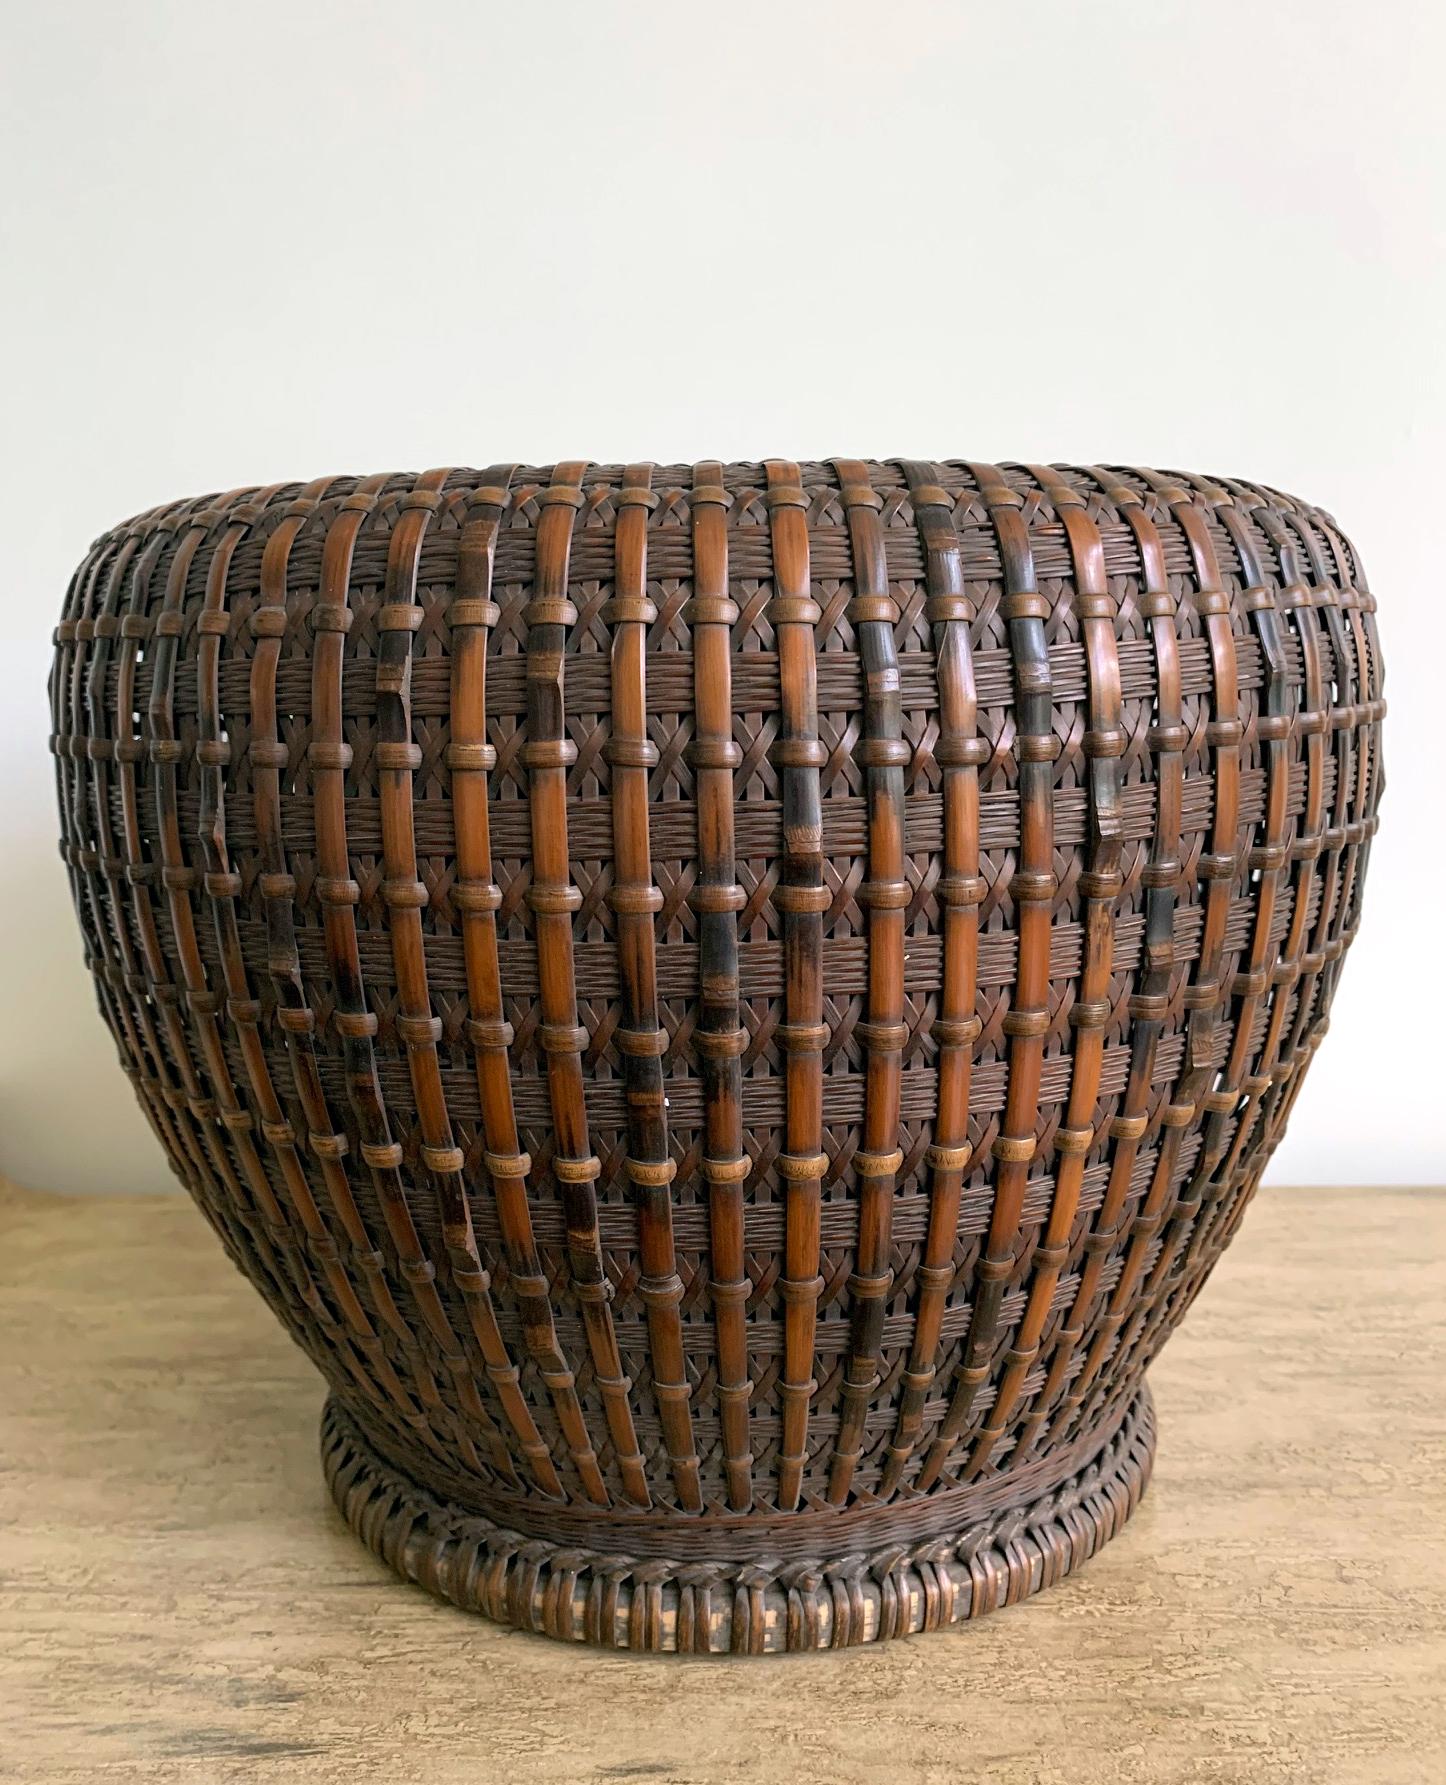 An important piece of bamboo basketry art by Maeda Chikubosai I (1872-1950), circa 1920s-1930s. The body of the bamboo brazier was made with smoked bamboo (susudake) and rattan and with a built-in copper liner brazier. Mat plaiting, diagonal